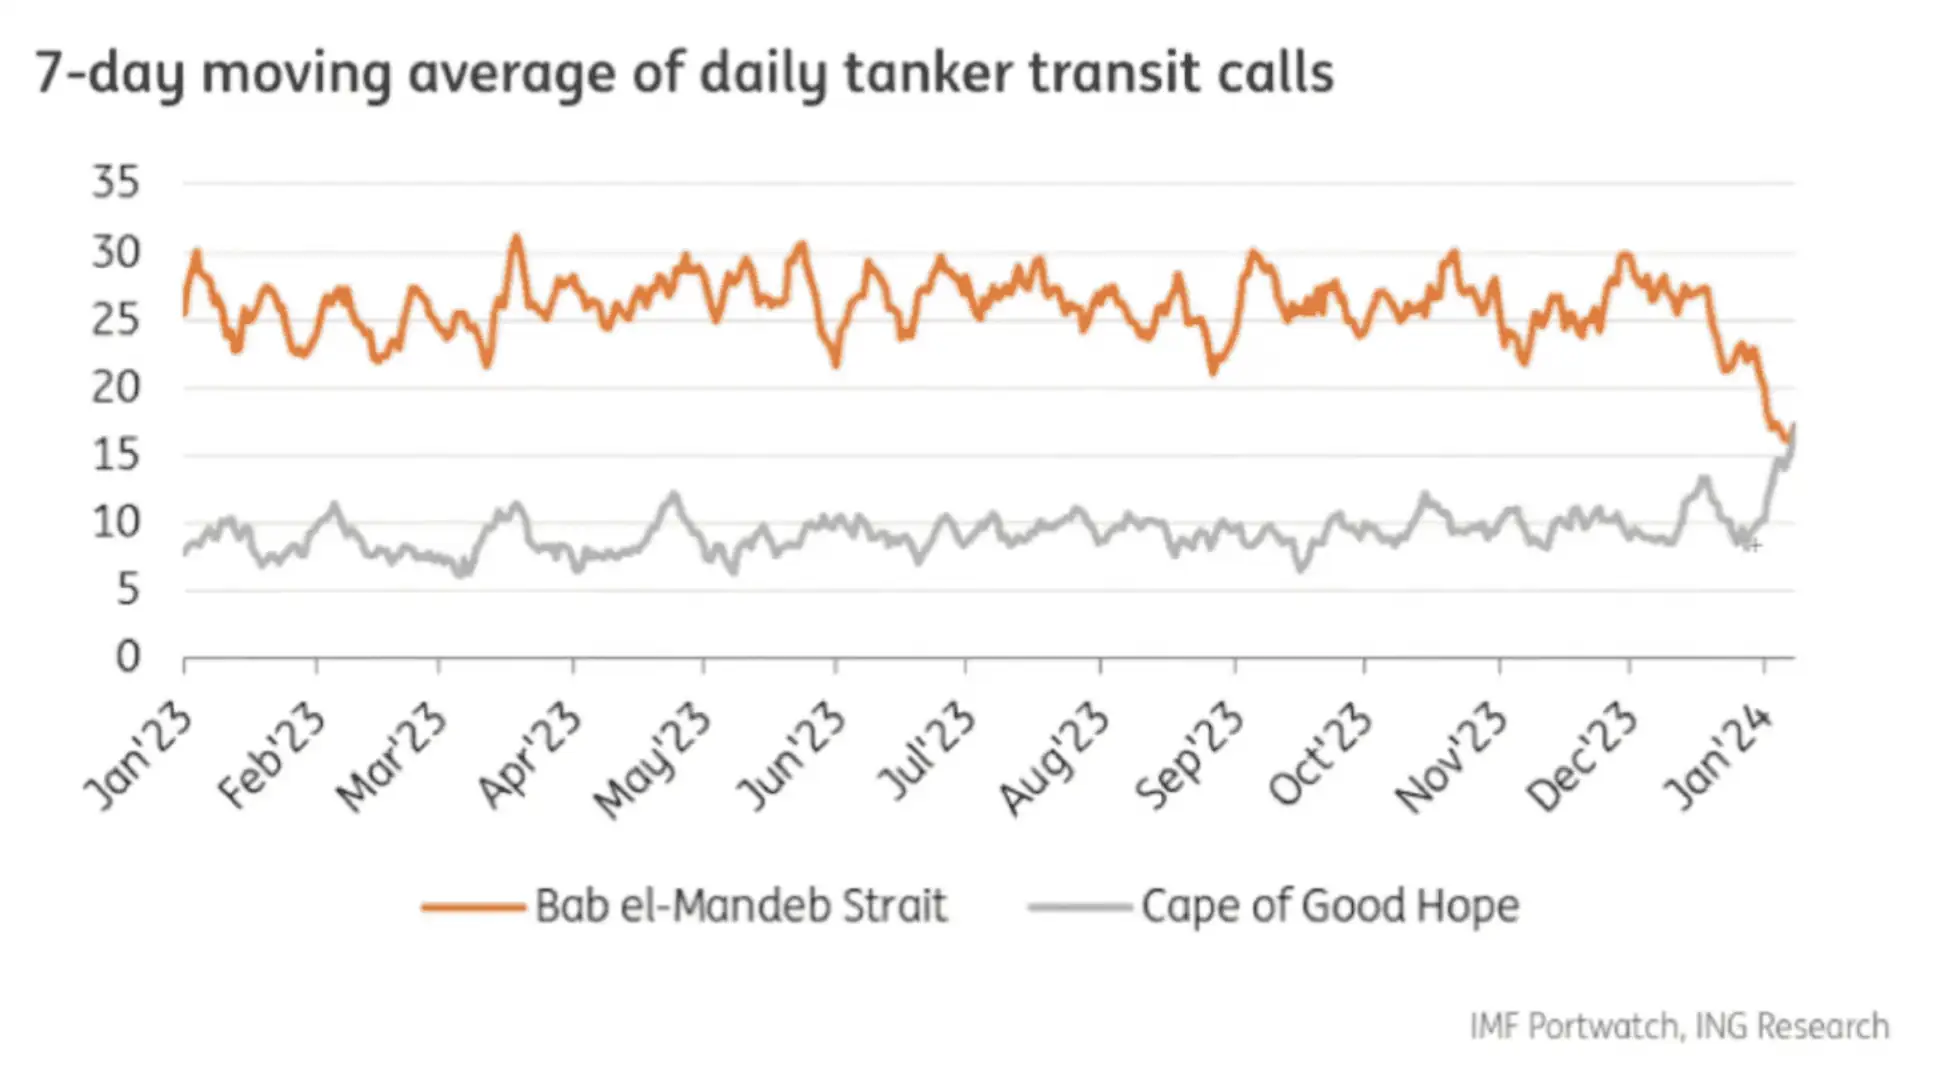 7-day moving average of daily tanker transit calls, by ING Research